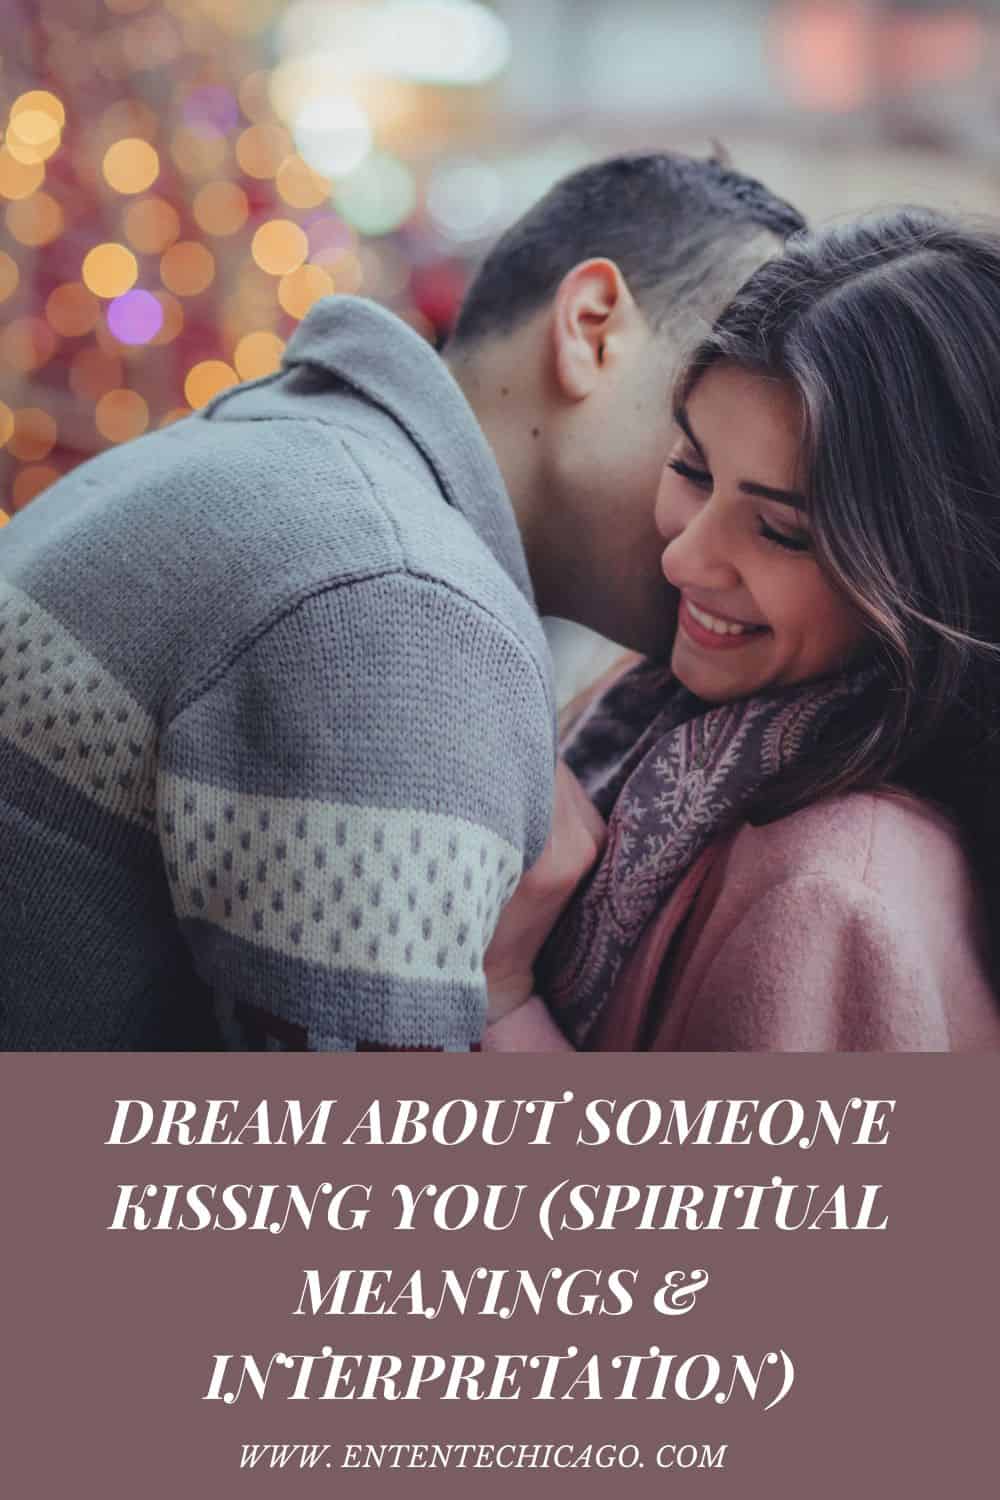 Dream About Someone Kissing You (Spiritual Meanings & Interpretation)